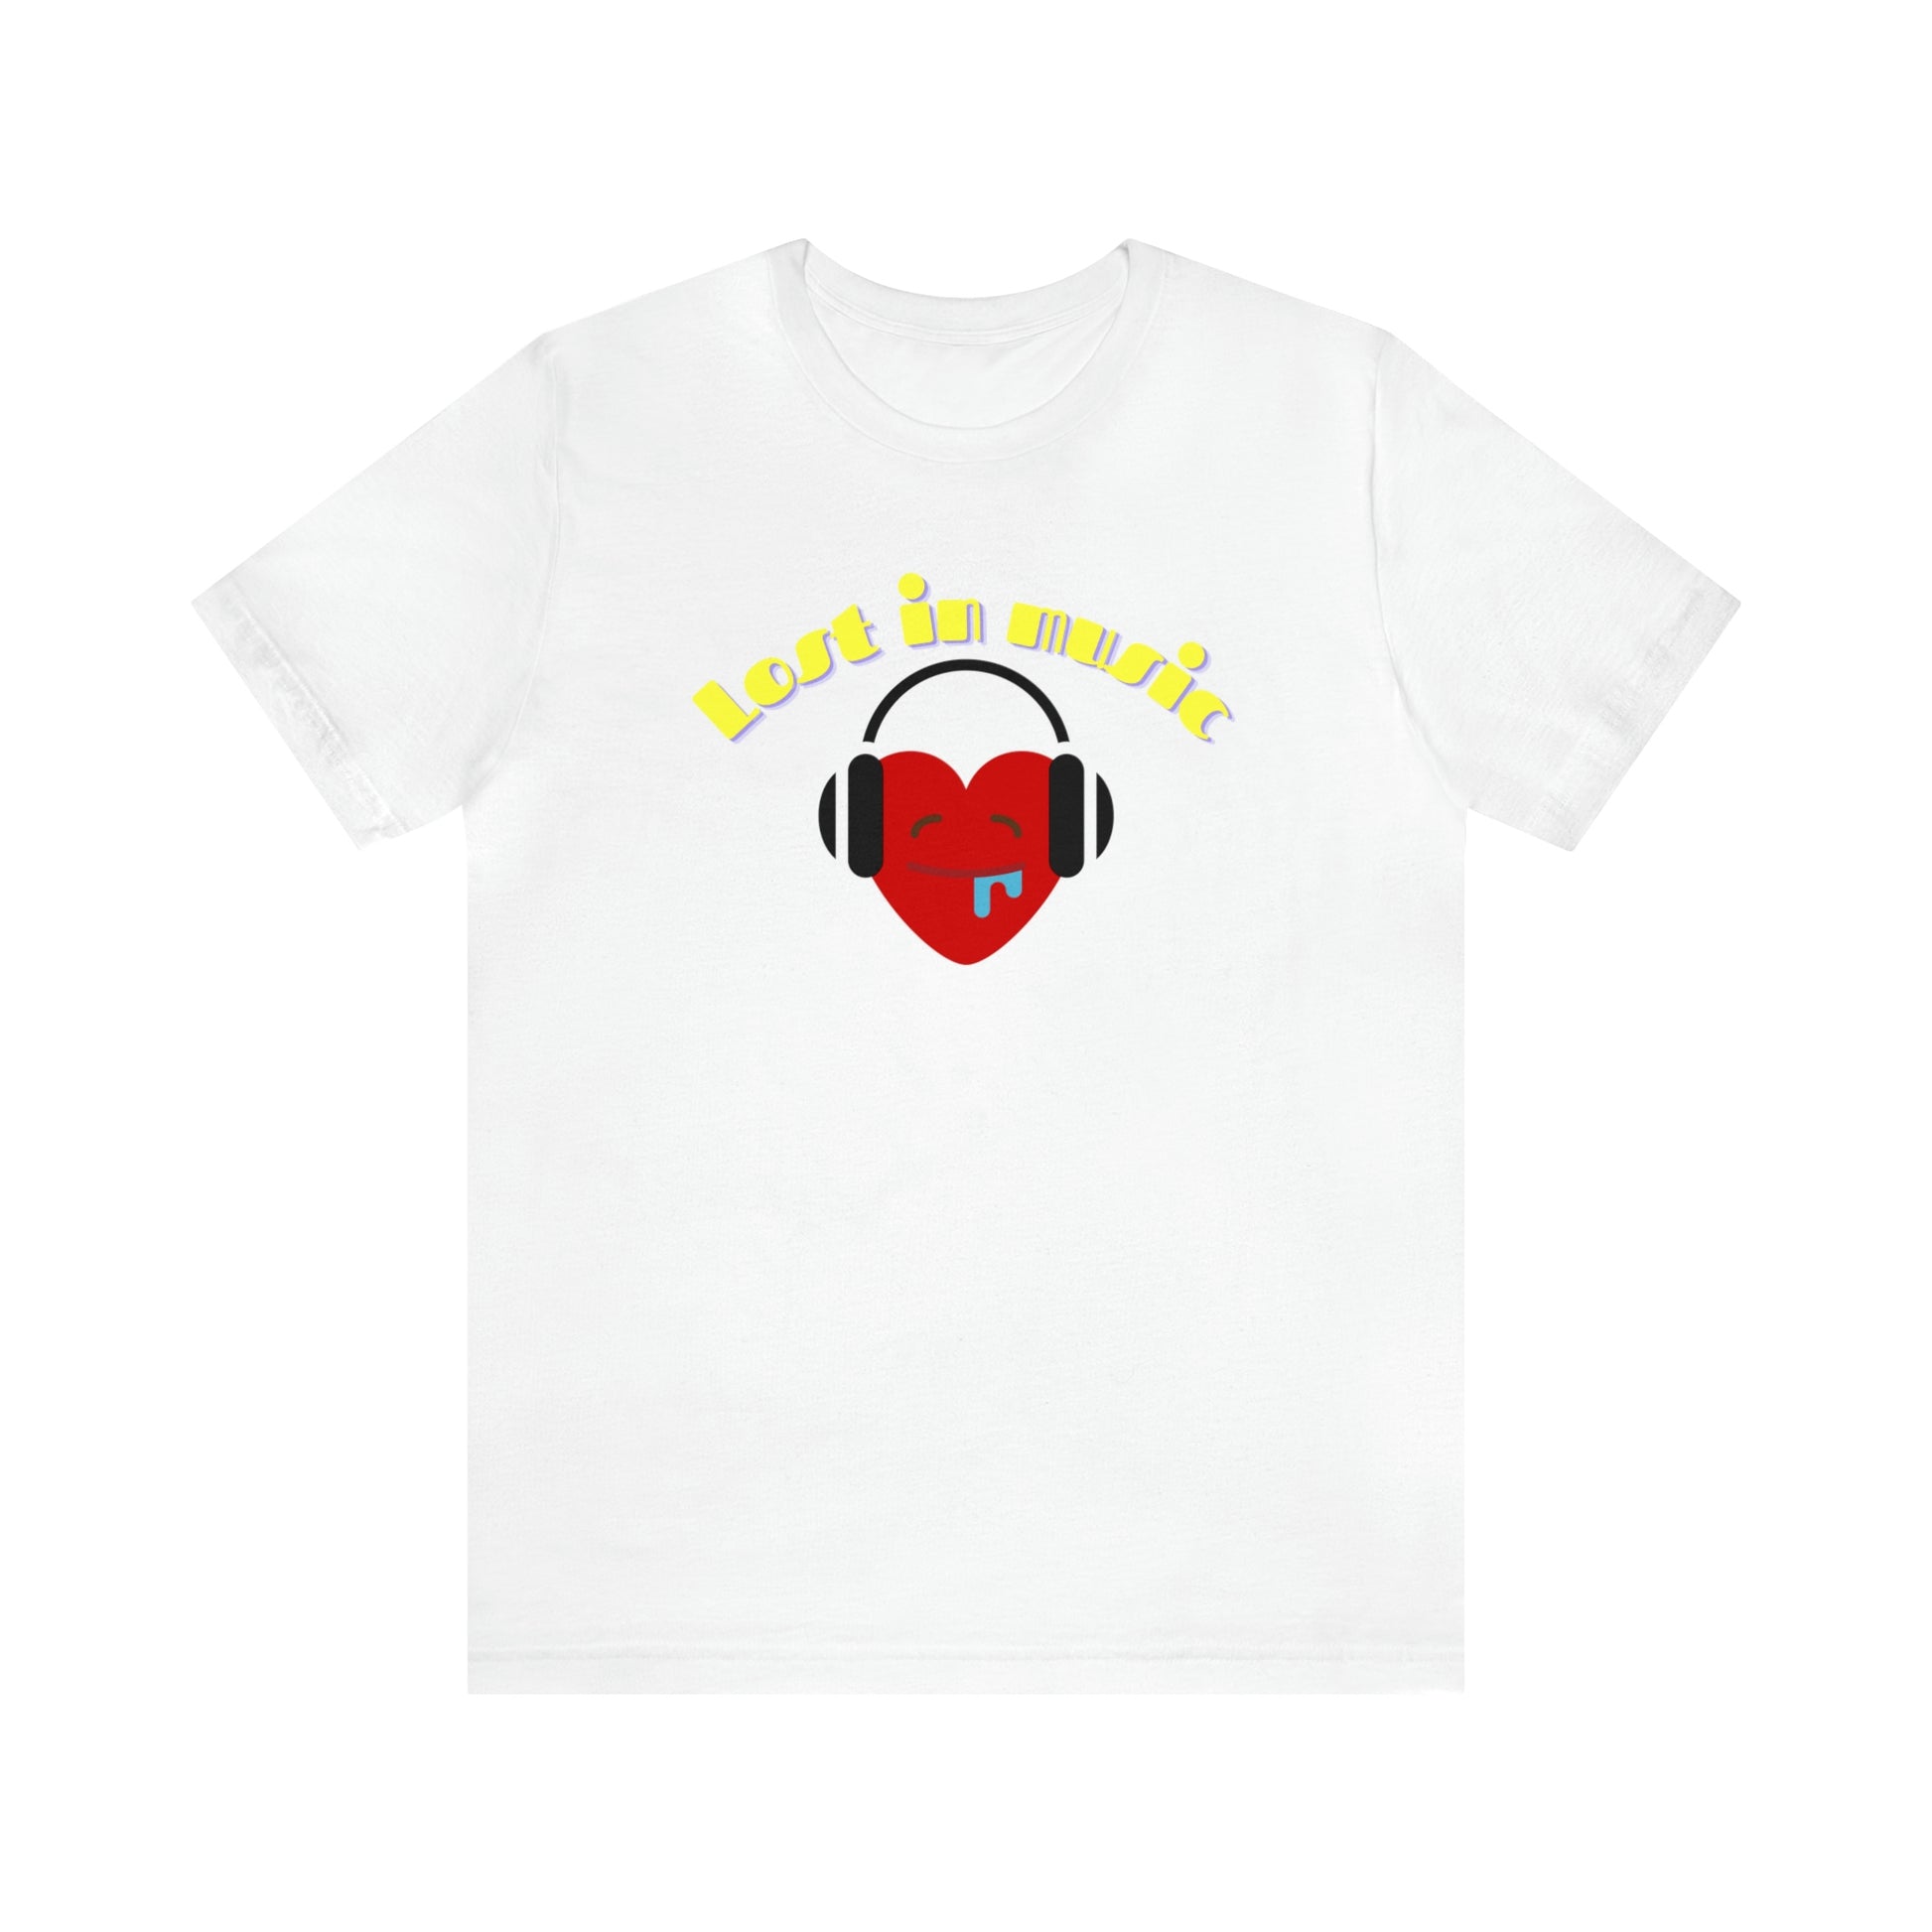 A music tshirt with the text "Lost in music" and a picture of a cartoon heart drooling while it's listening to music on its headphones